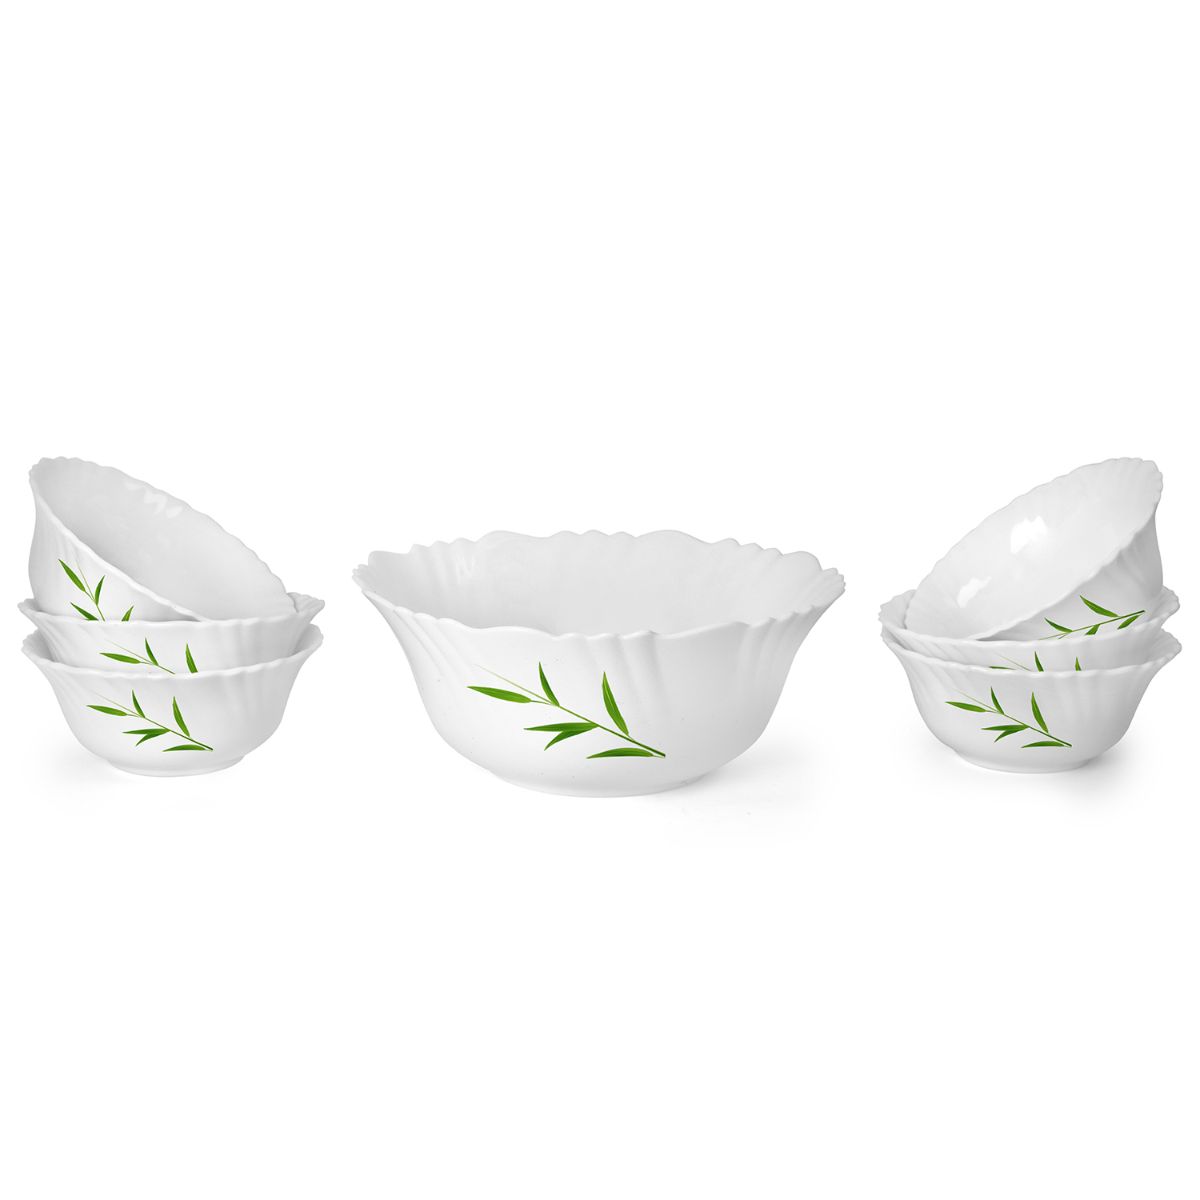 Imperial Series Dessert Set, 7 Pieces Bamboo Grove / 7 Pieces